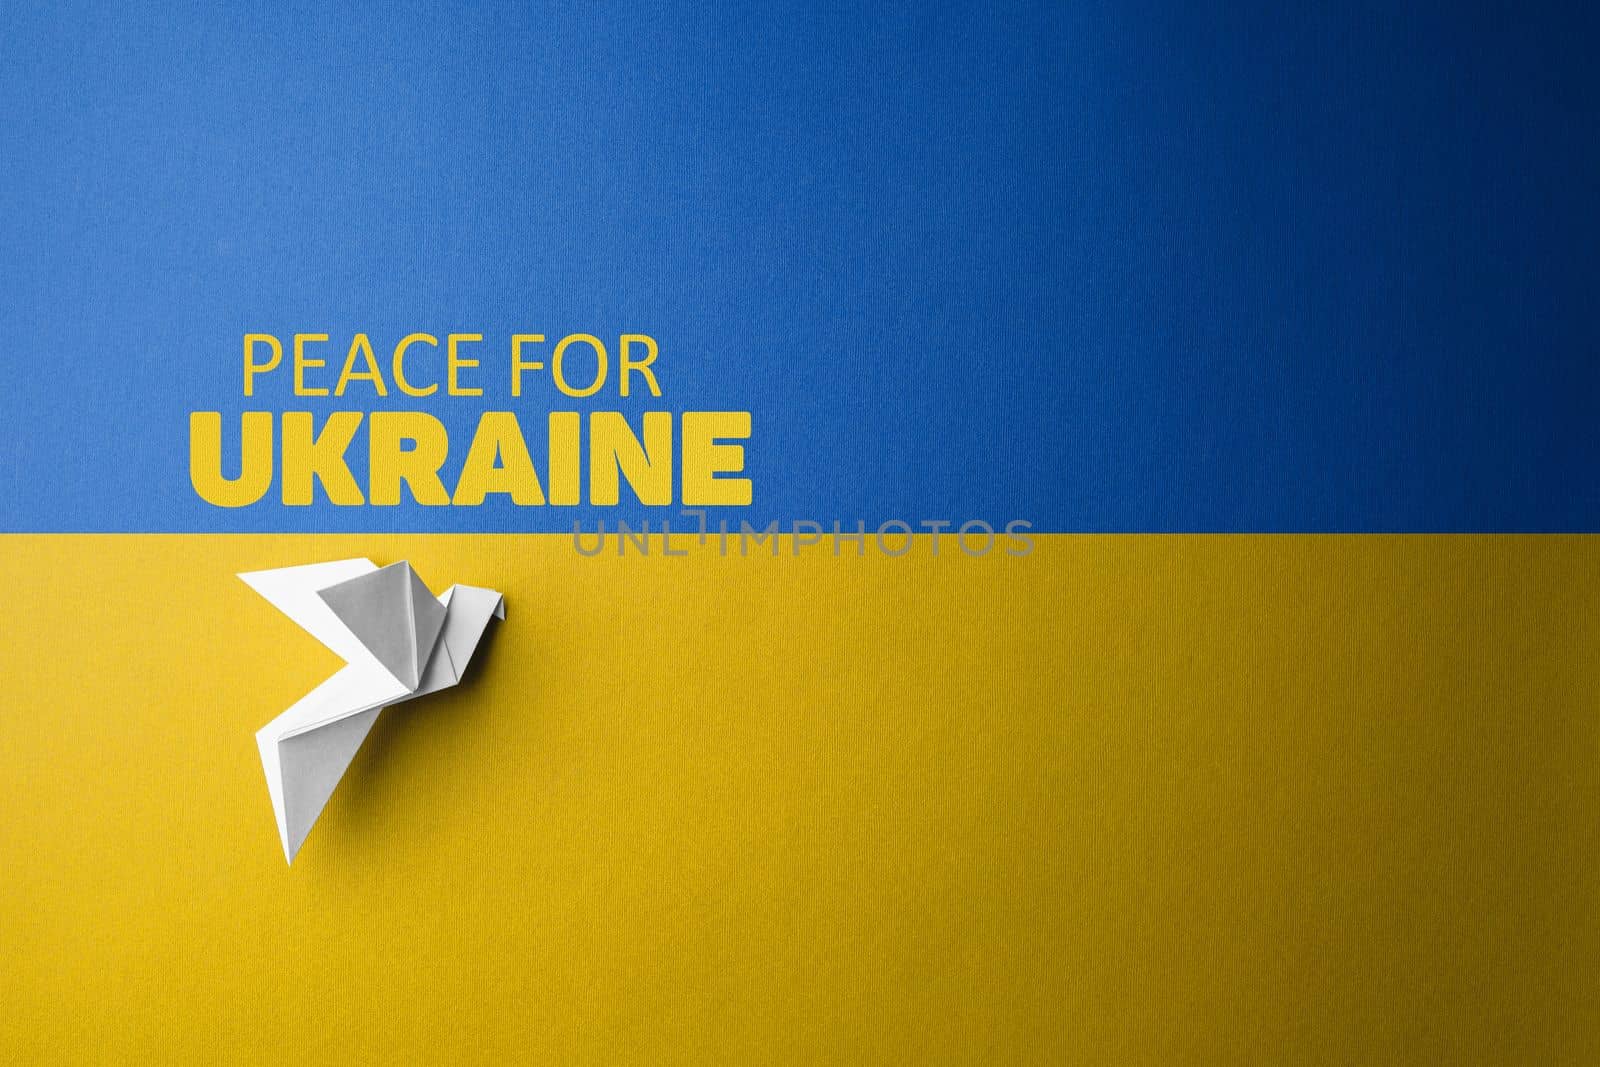 symbol of freedom white paper dove on the background of flag of ukraine with blue yellow color with words peace for Ukraine